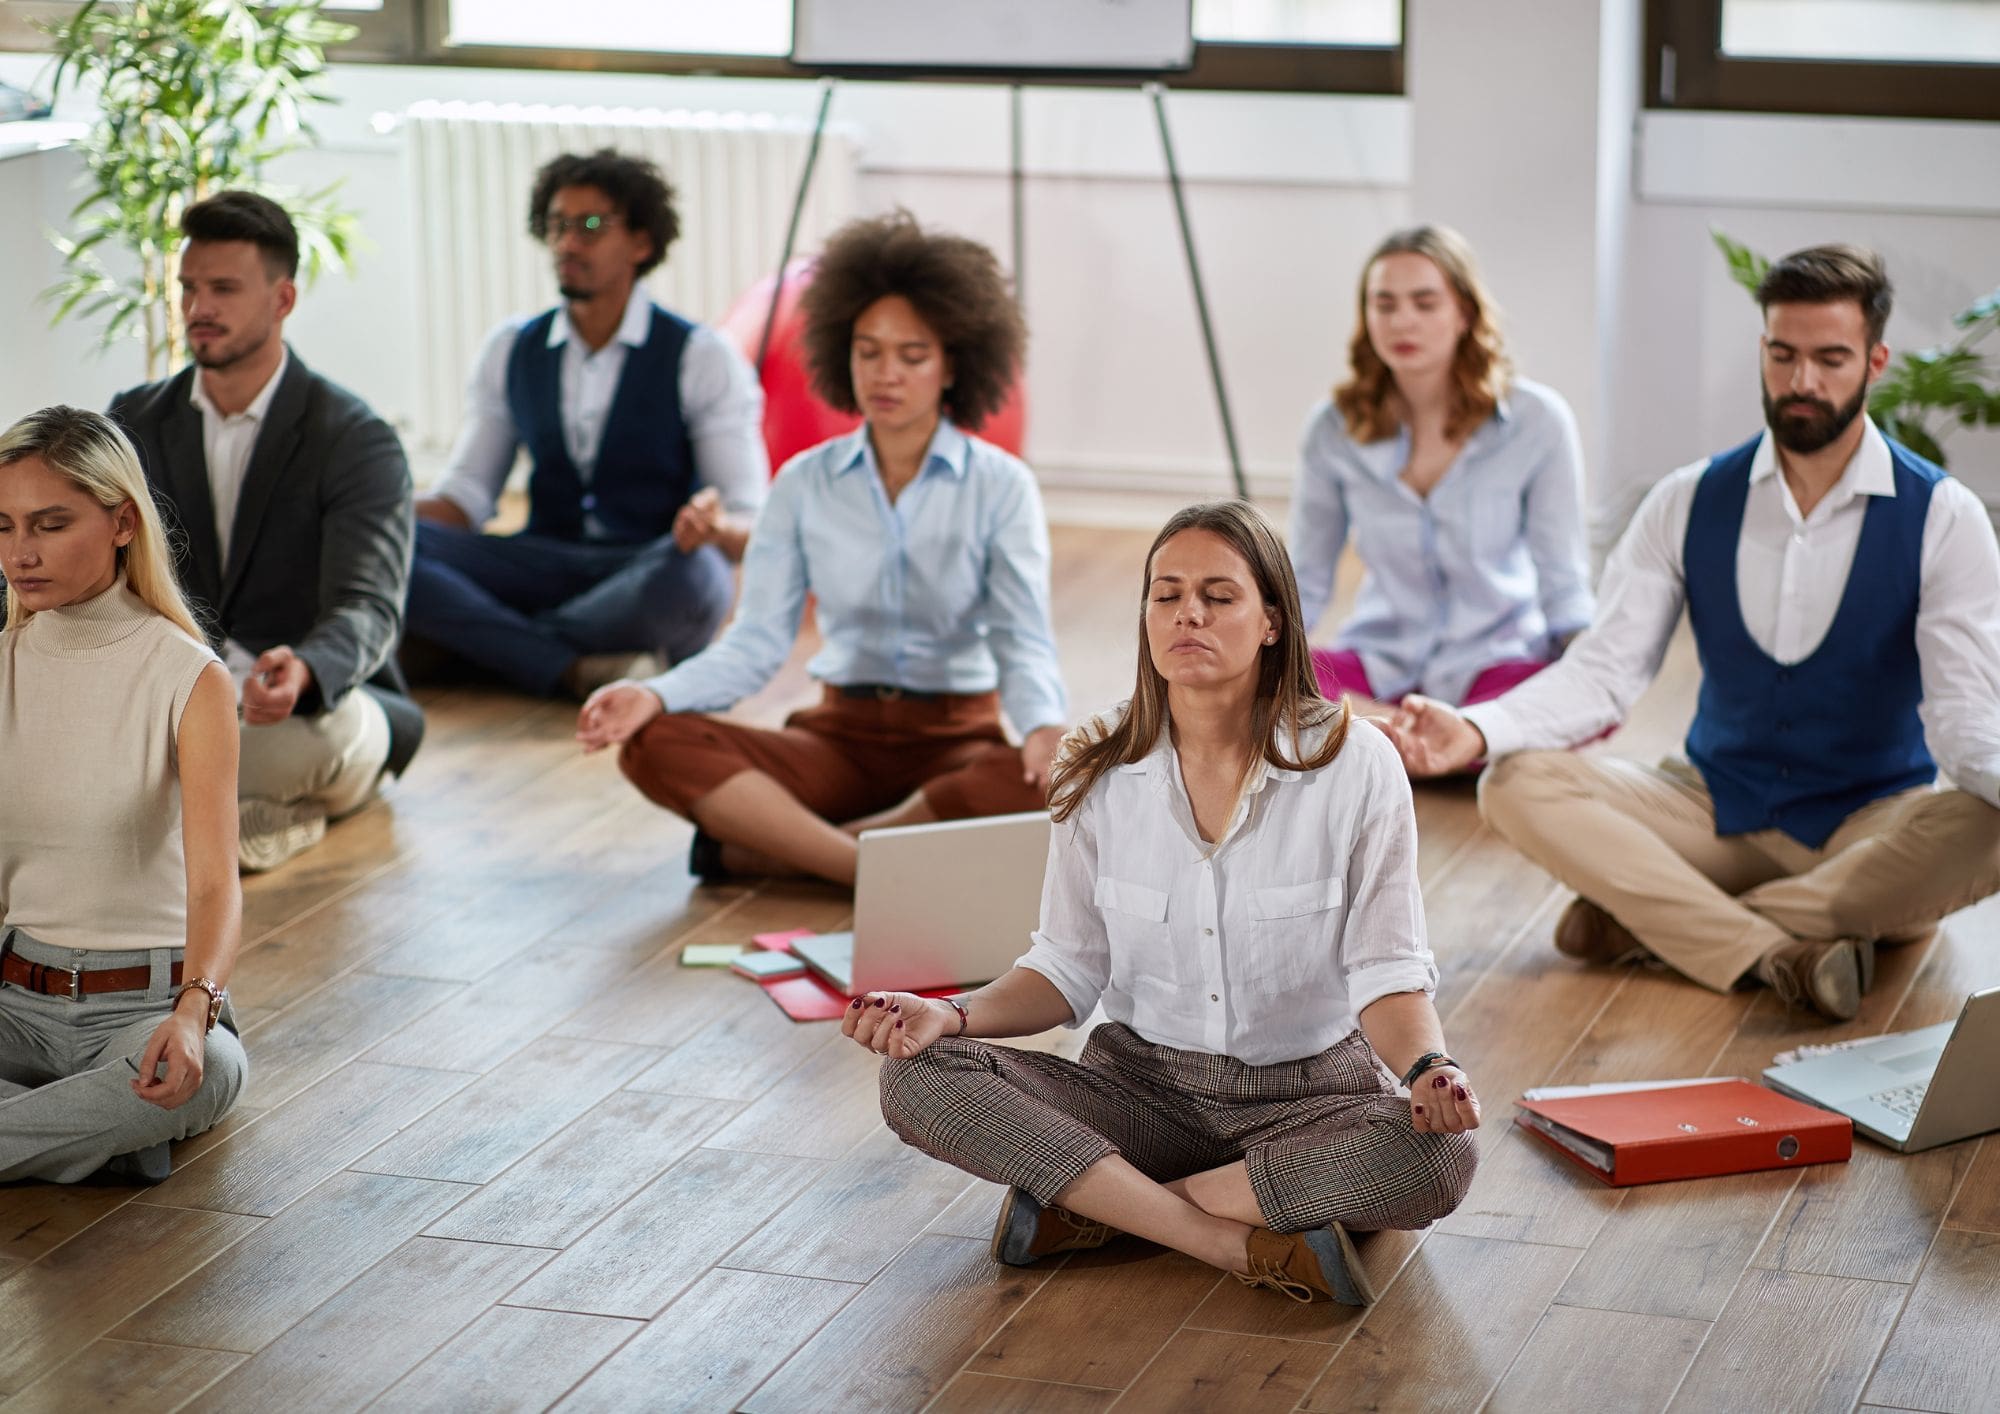 A group of business people meditating on the floor of a bright office.